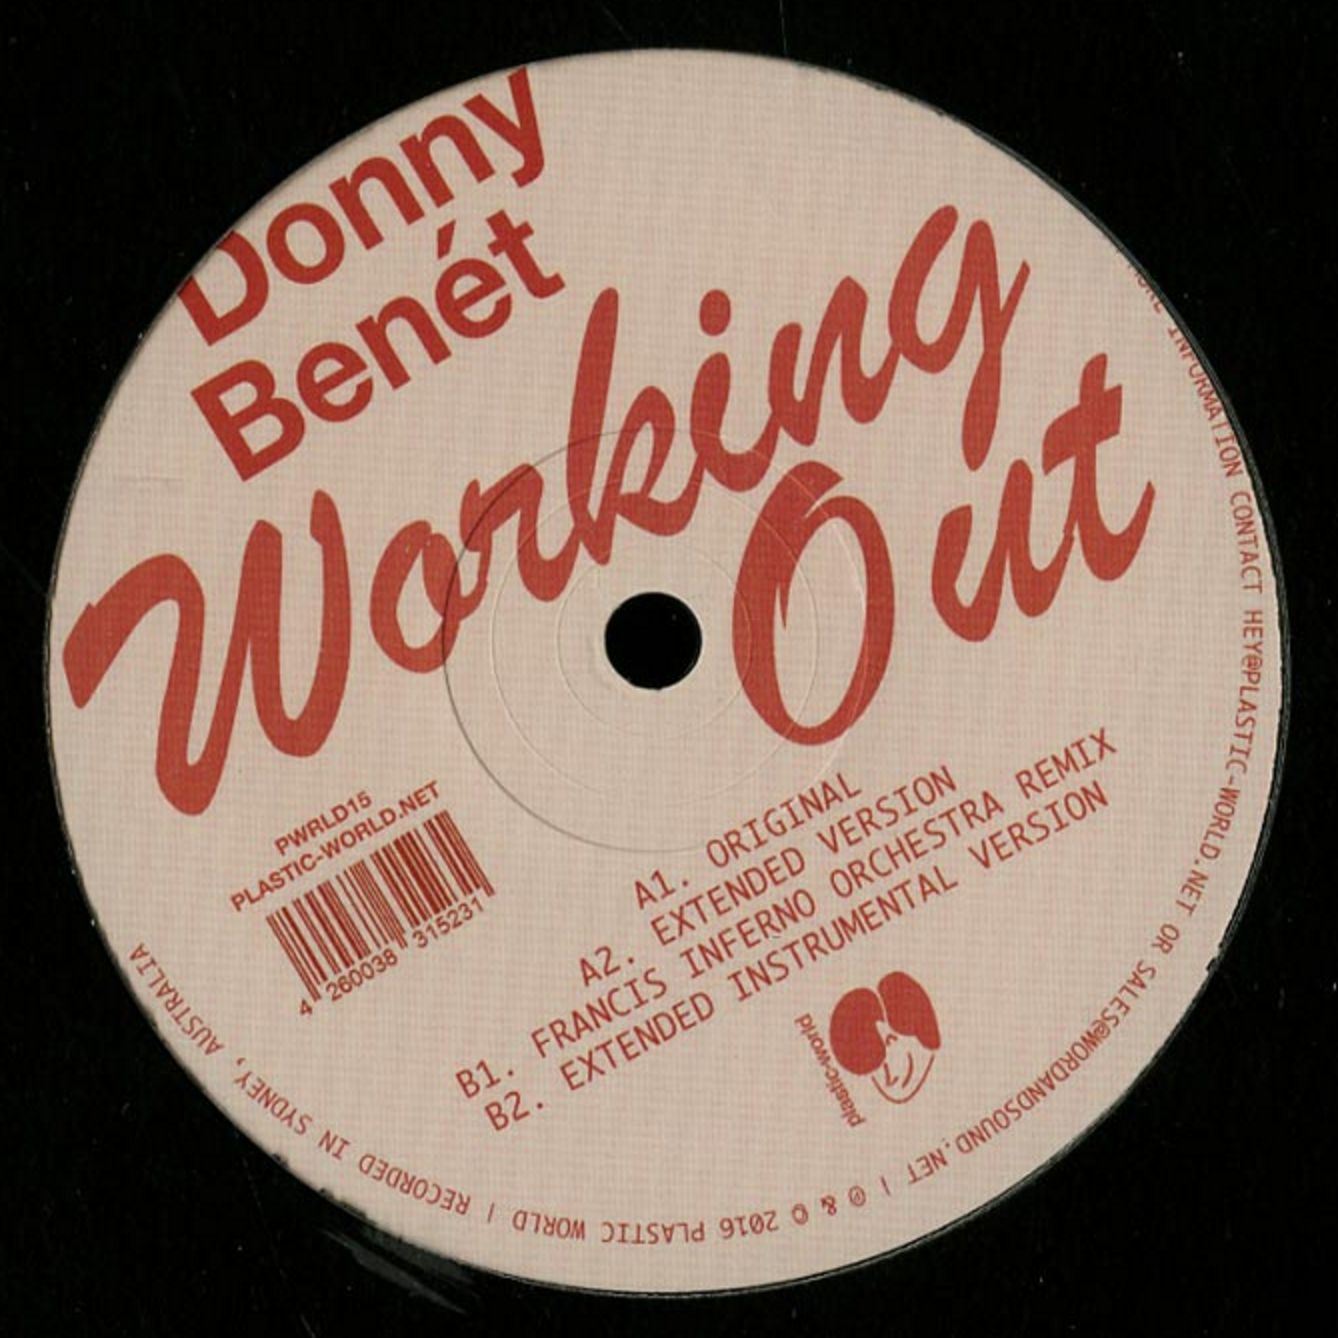 Scaricamento Donny Benet - Working Out (FIO's Yarra Bend Reprise)